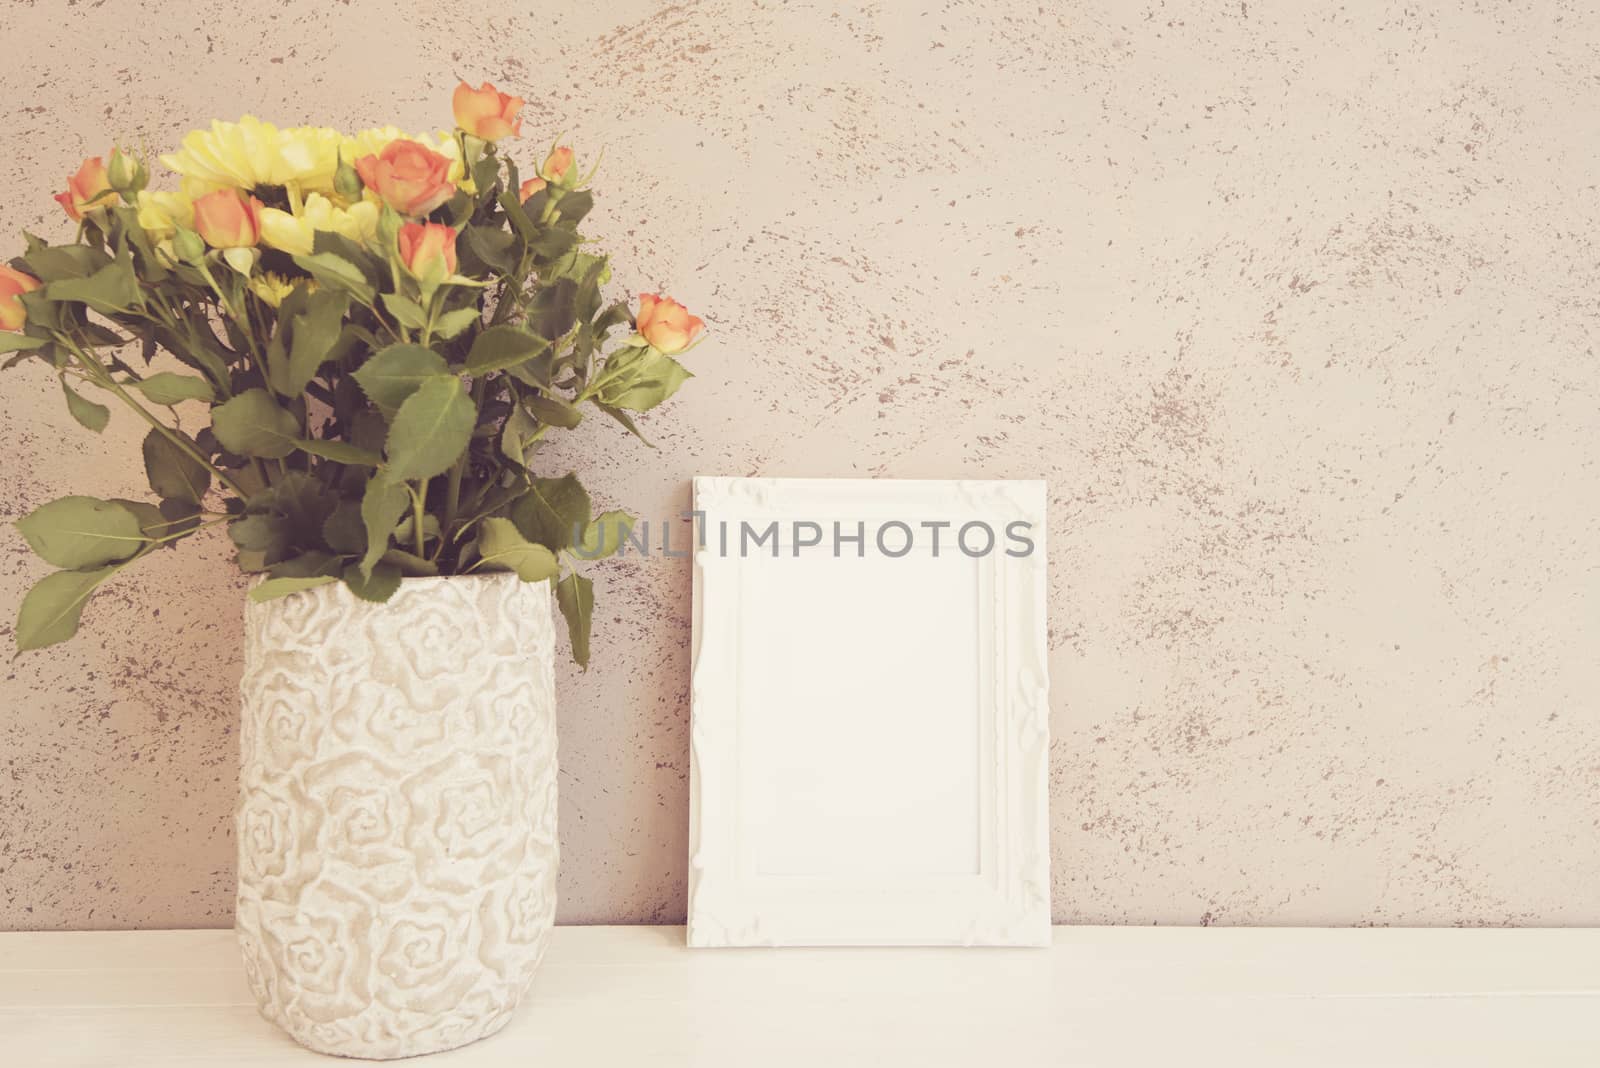 White Frame Mock Up, Digital MockUp, Display Mockup, Styled Stock Photography Mockup, Colorful Desktop Mock Up. Rustic vase with orange roses and yellow chrysanthemums. White background, empty place, copy space. Vintage tinted